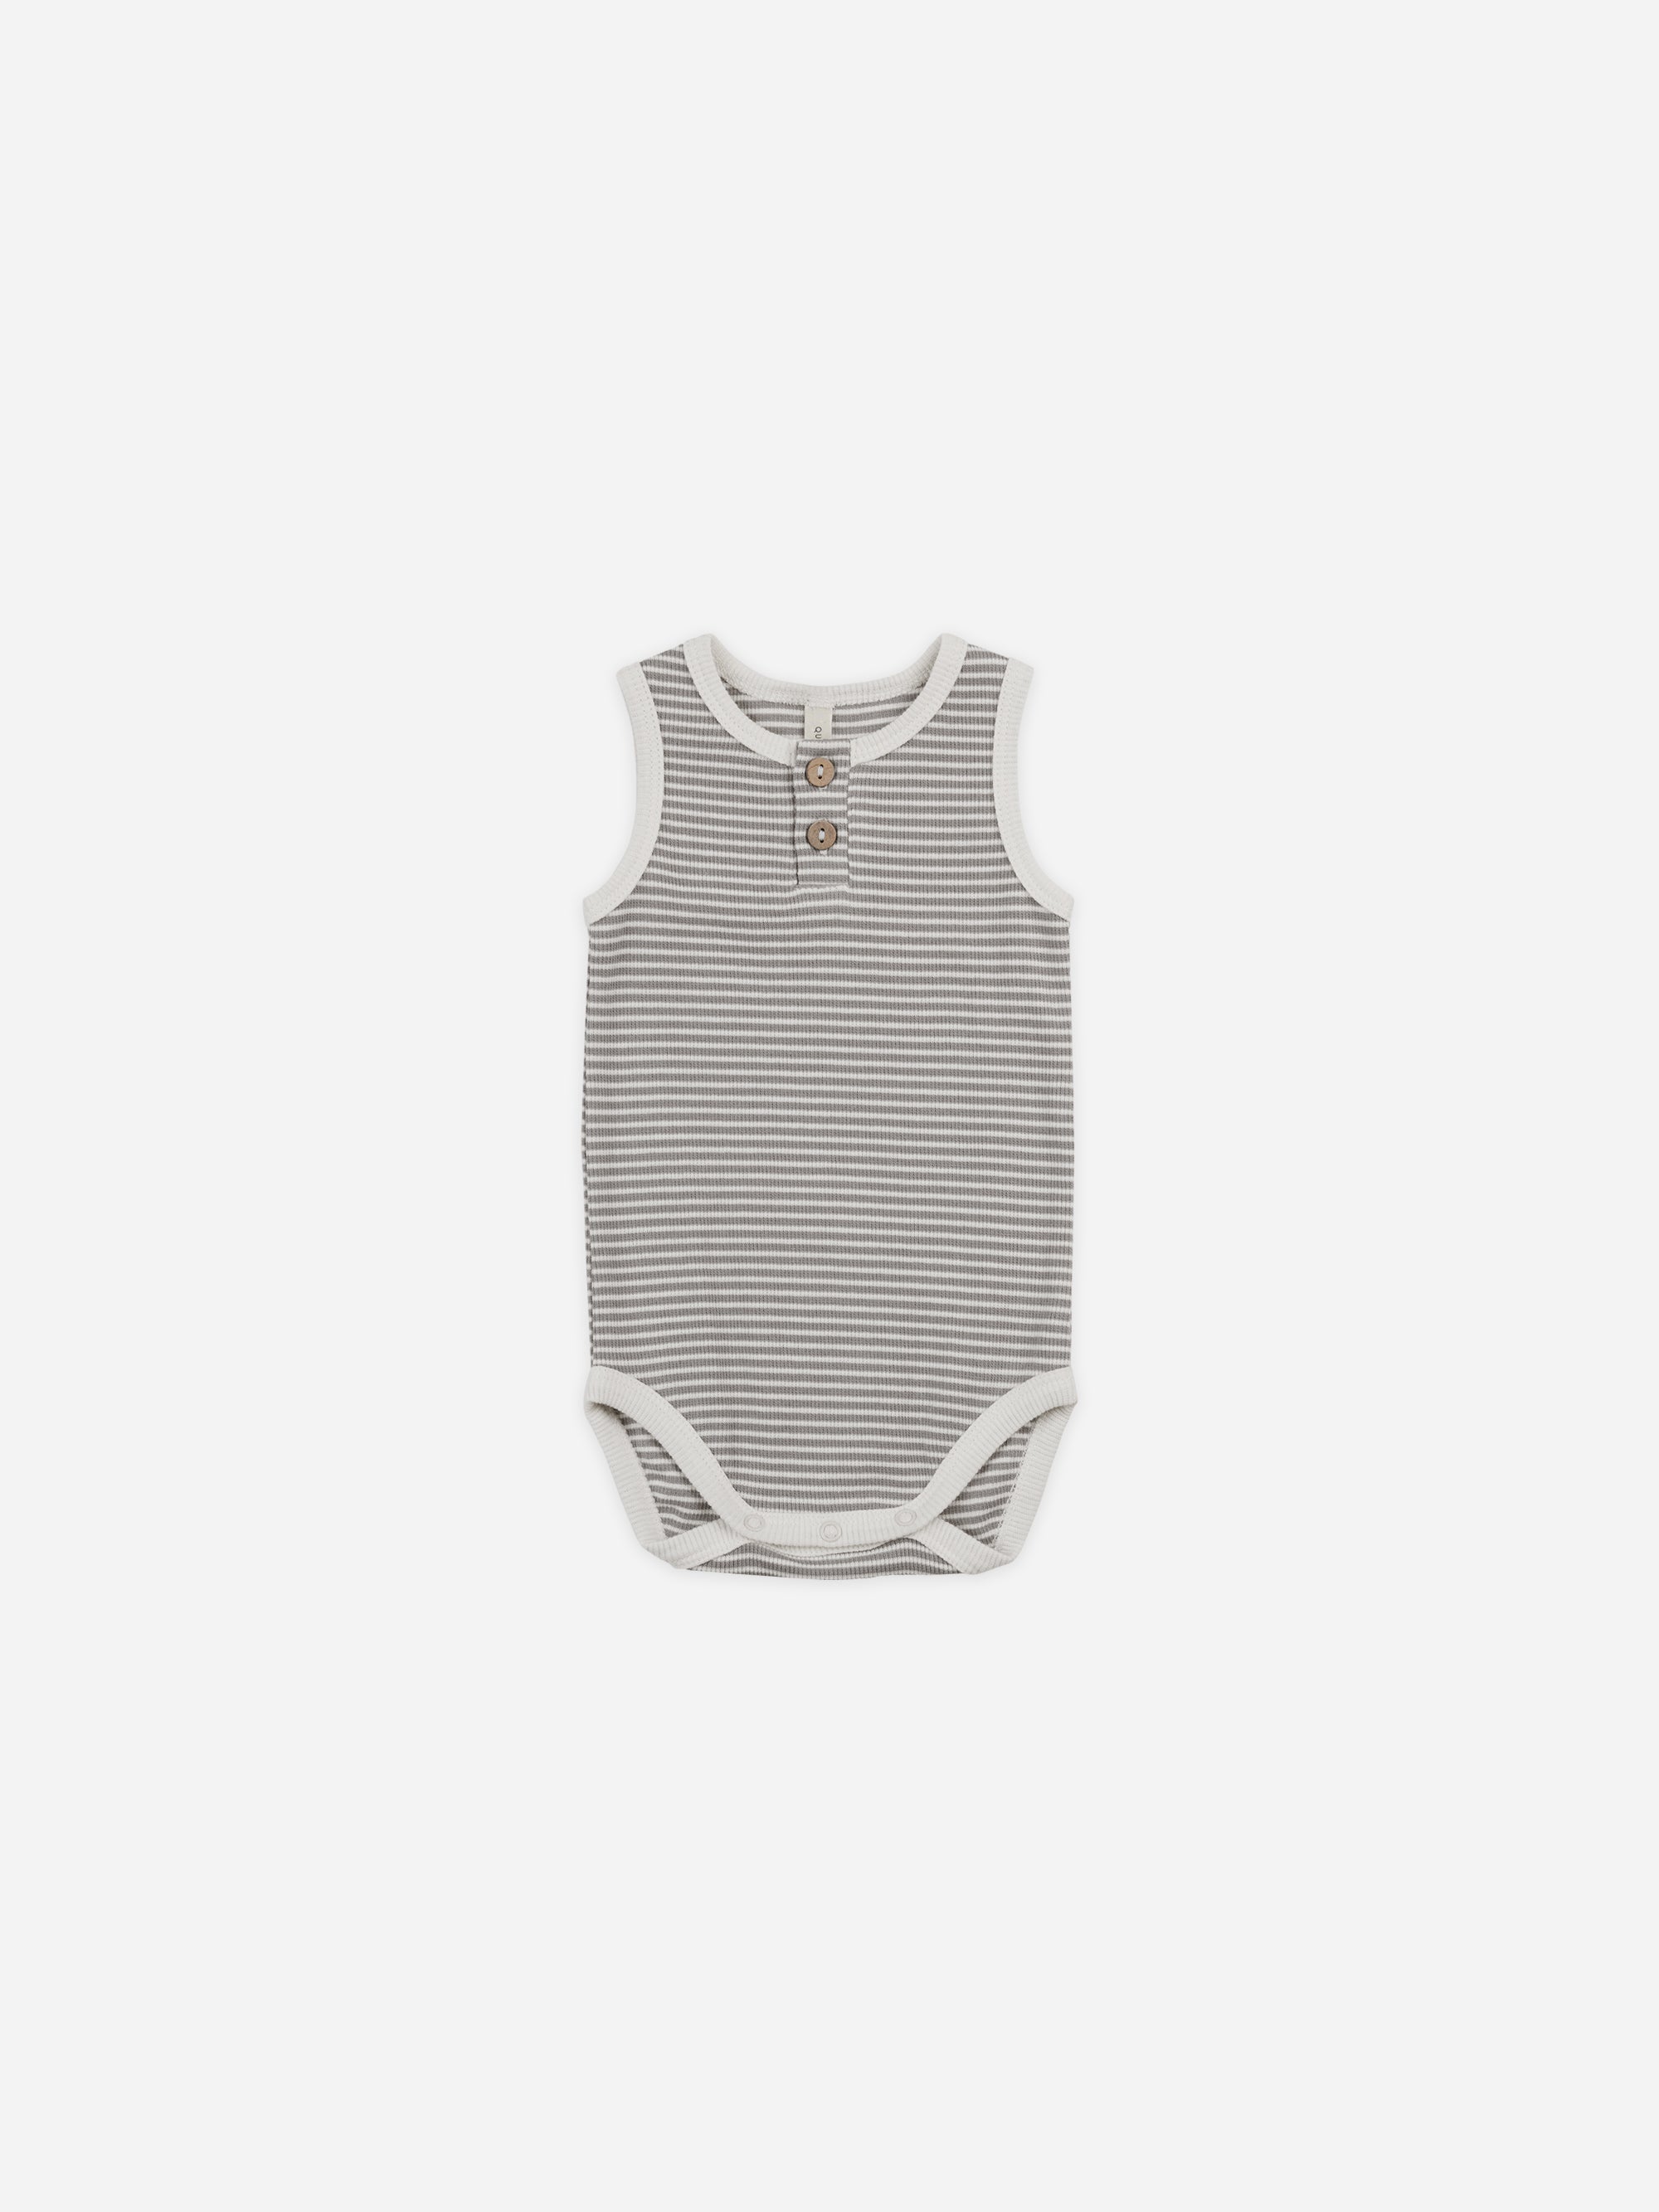 Sleeveless Henley Bodysuit || Lagoon Micro Stripe - Rylee + Cru | Kids Clothes | Trendy Baby Clothes | Modern Infant Outfits |